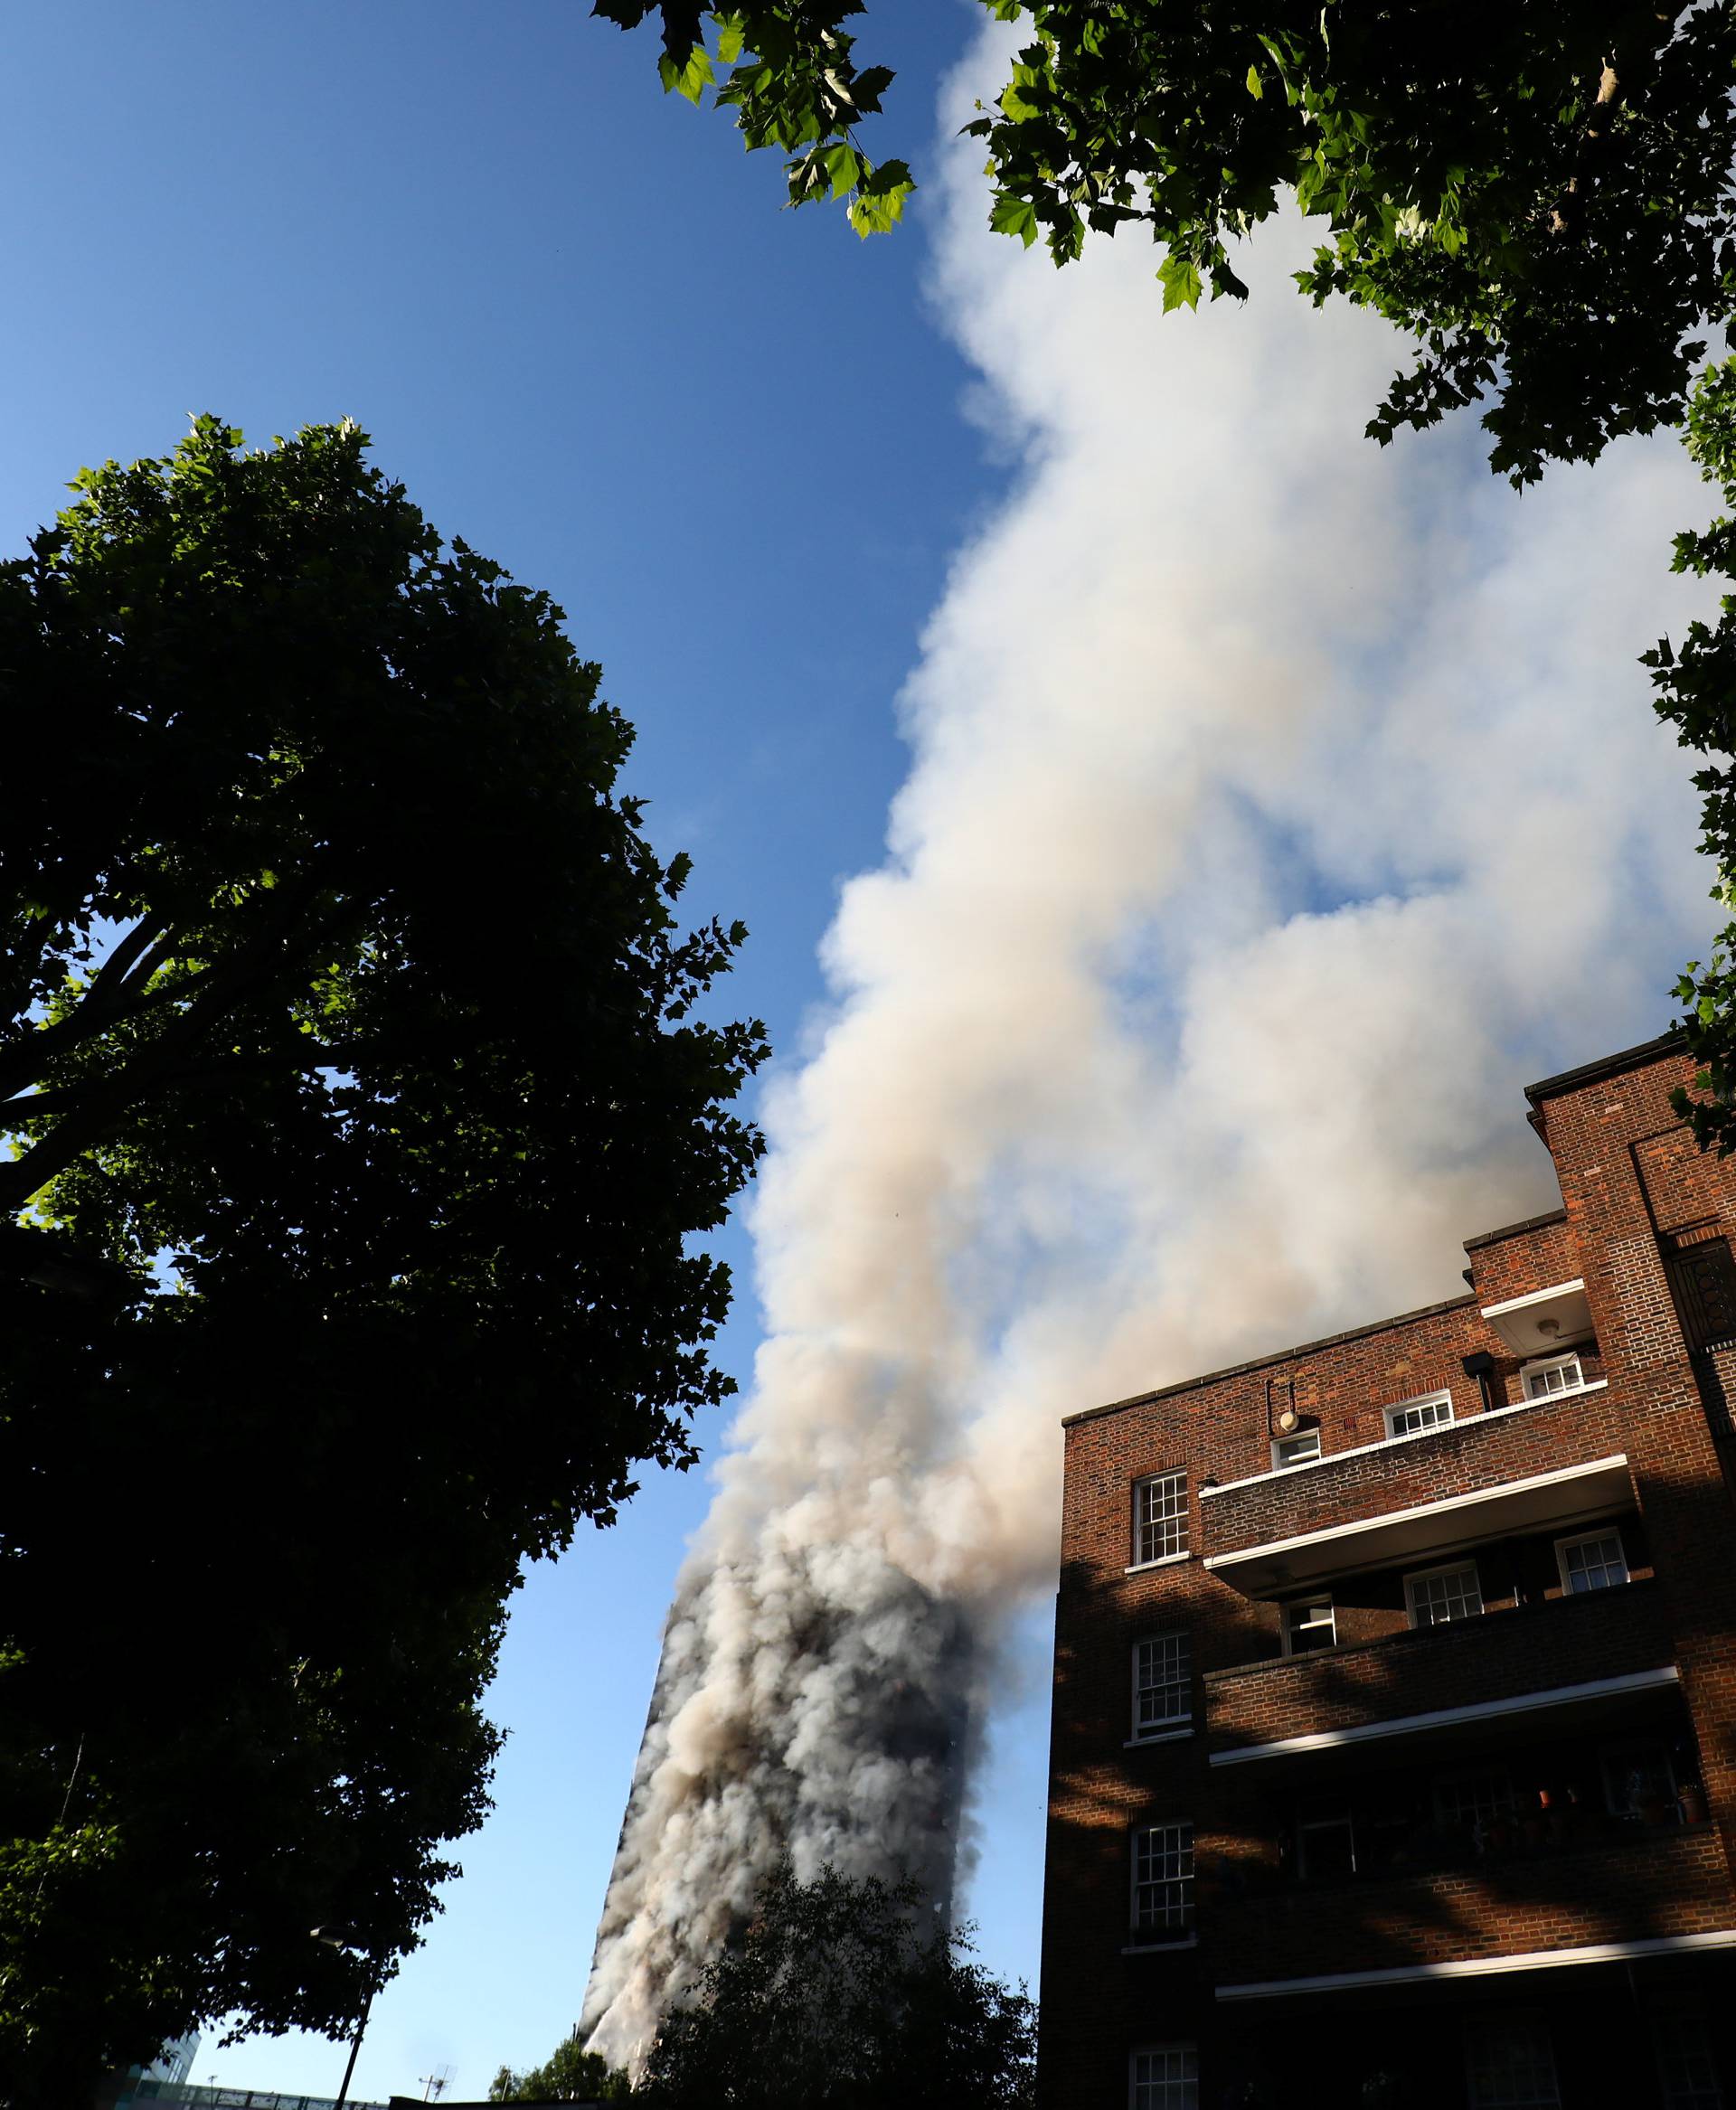 Smoke billows as firefighters tackle a serious fire in a tower block at Latimer Road in West London, Britain